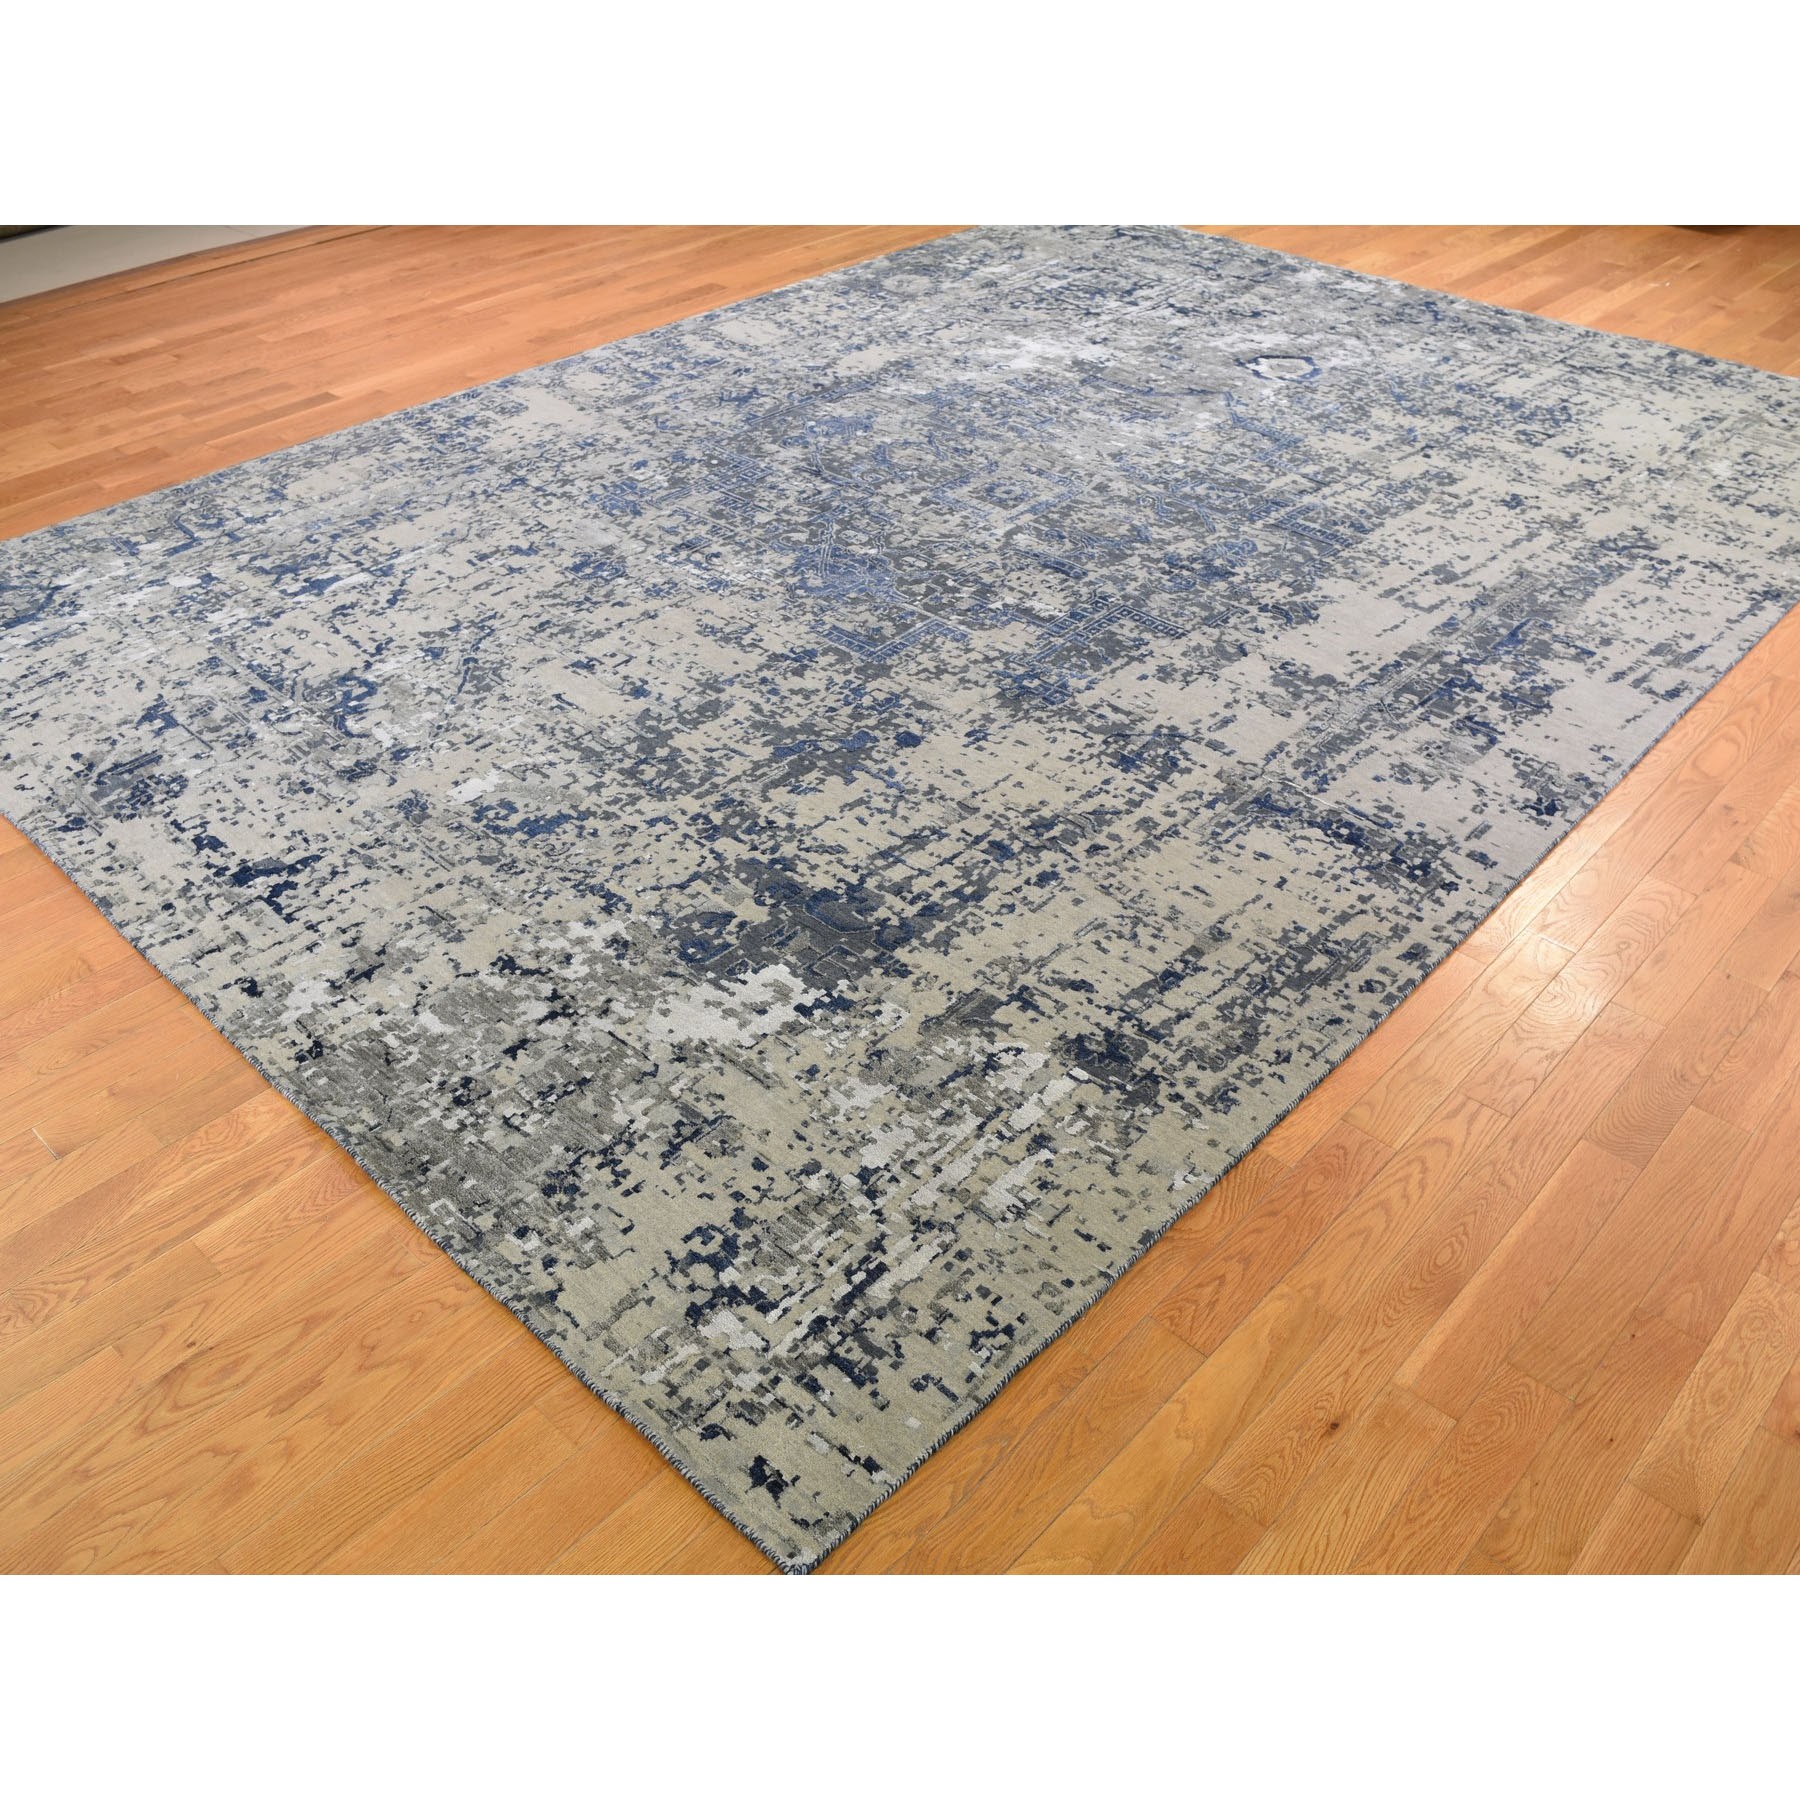 10-x14- Blue-Gray Erased Heriz Design Wool and Silk Hand-Knotted Oriental Rug 